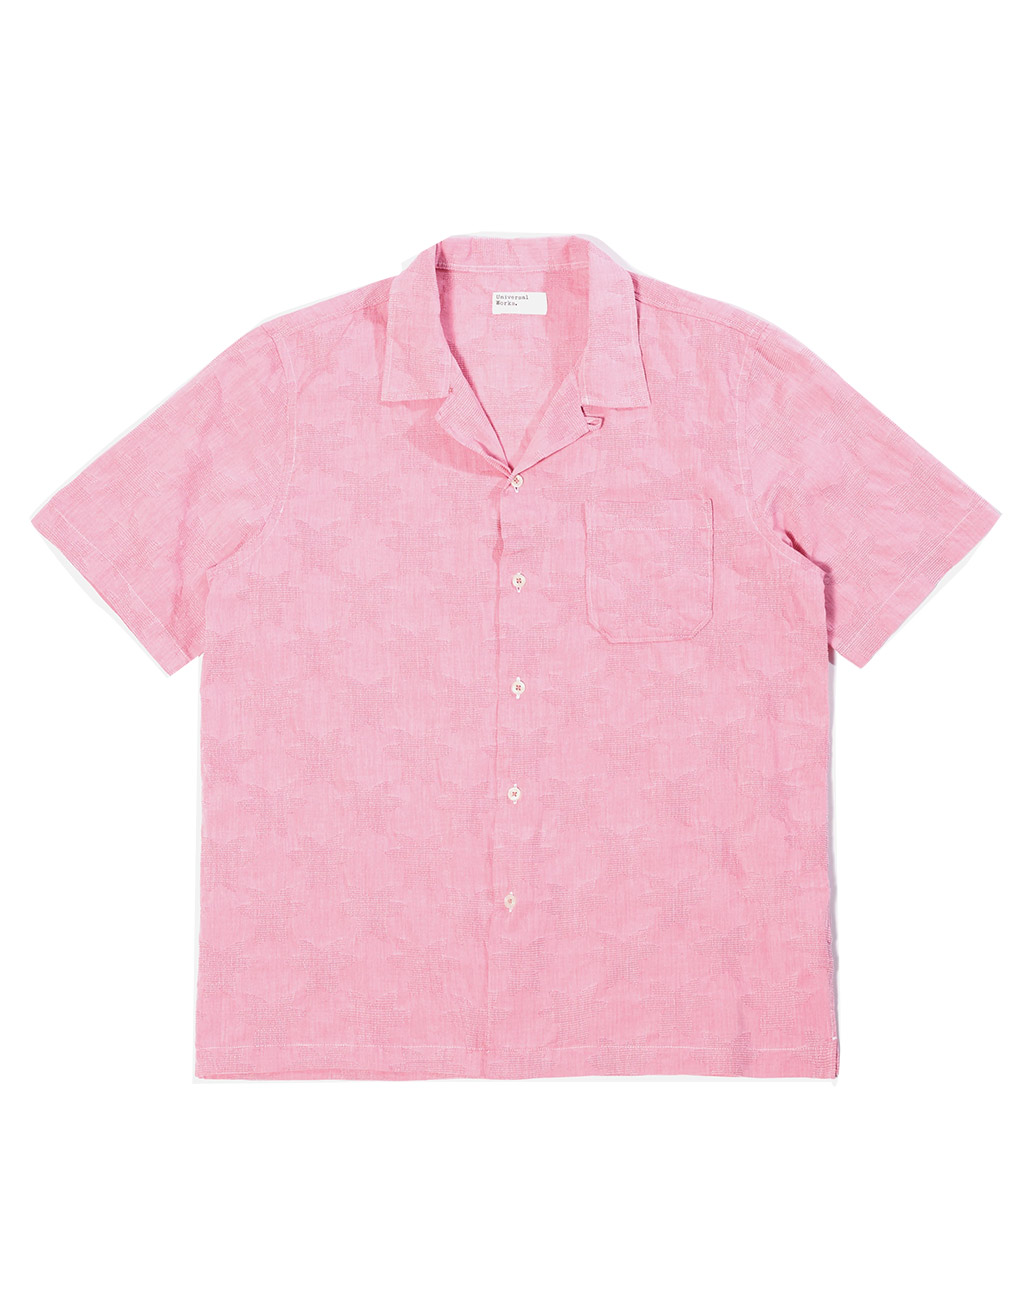 Universal Works – Road shirt in red star weave